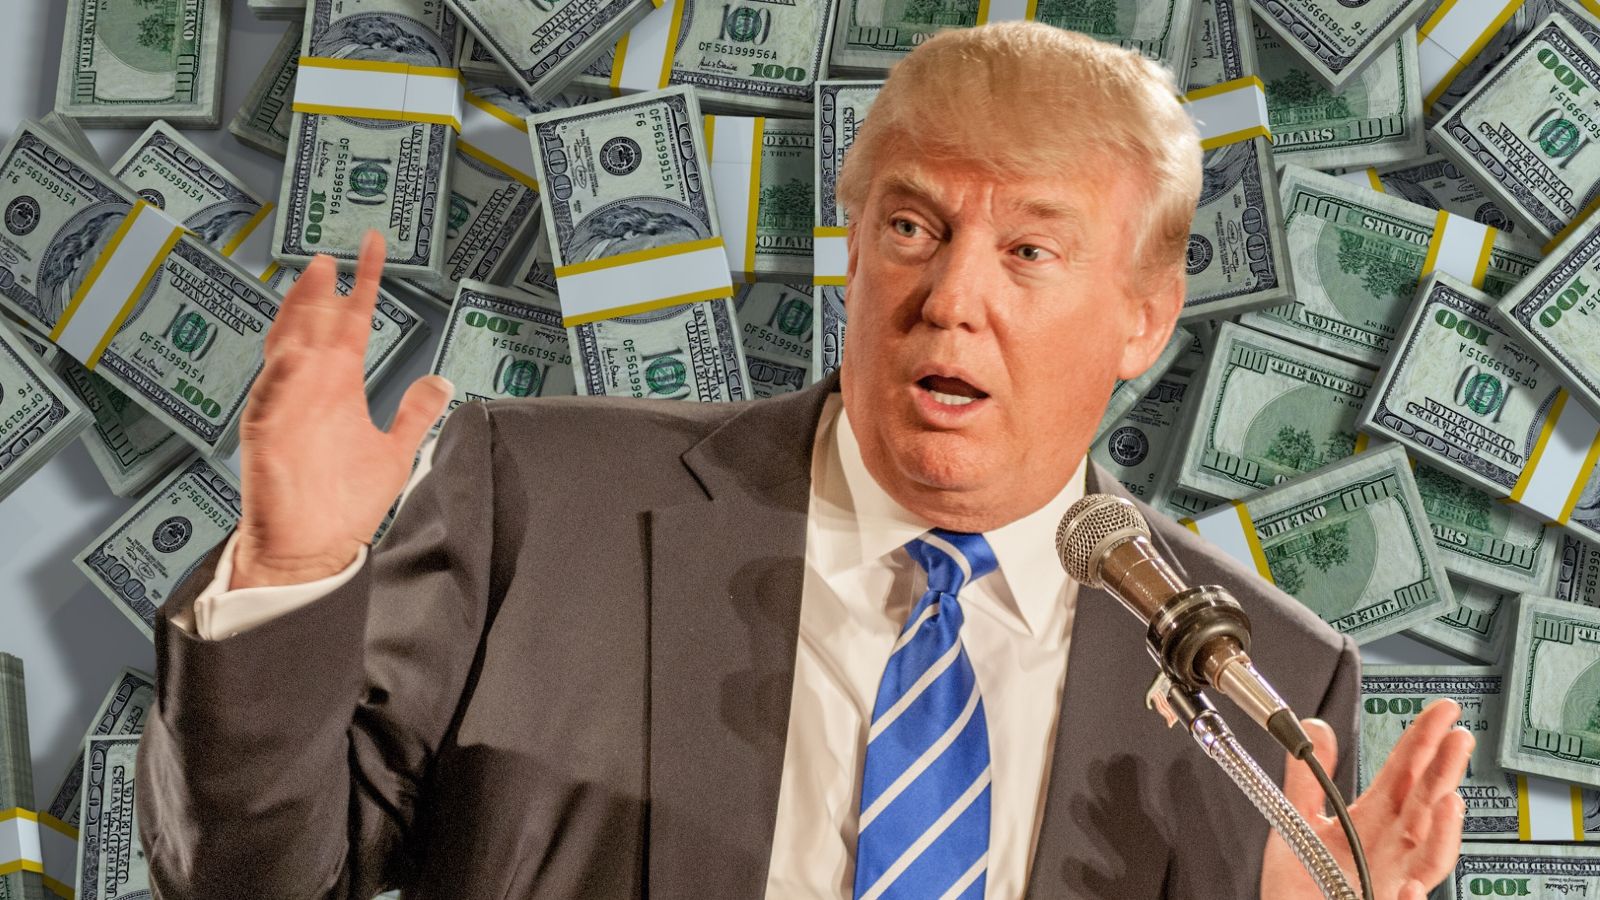 “The Trump Name Is Worthless” – Trump’s Property Valuations Analyzed by Real Estate Developer